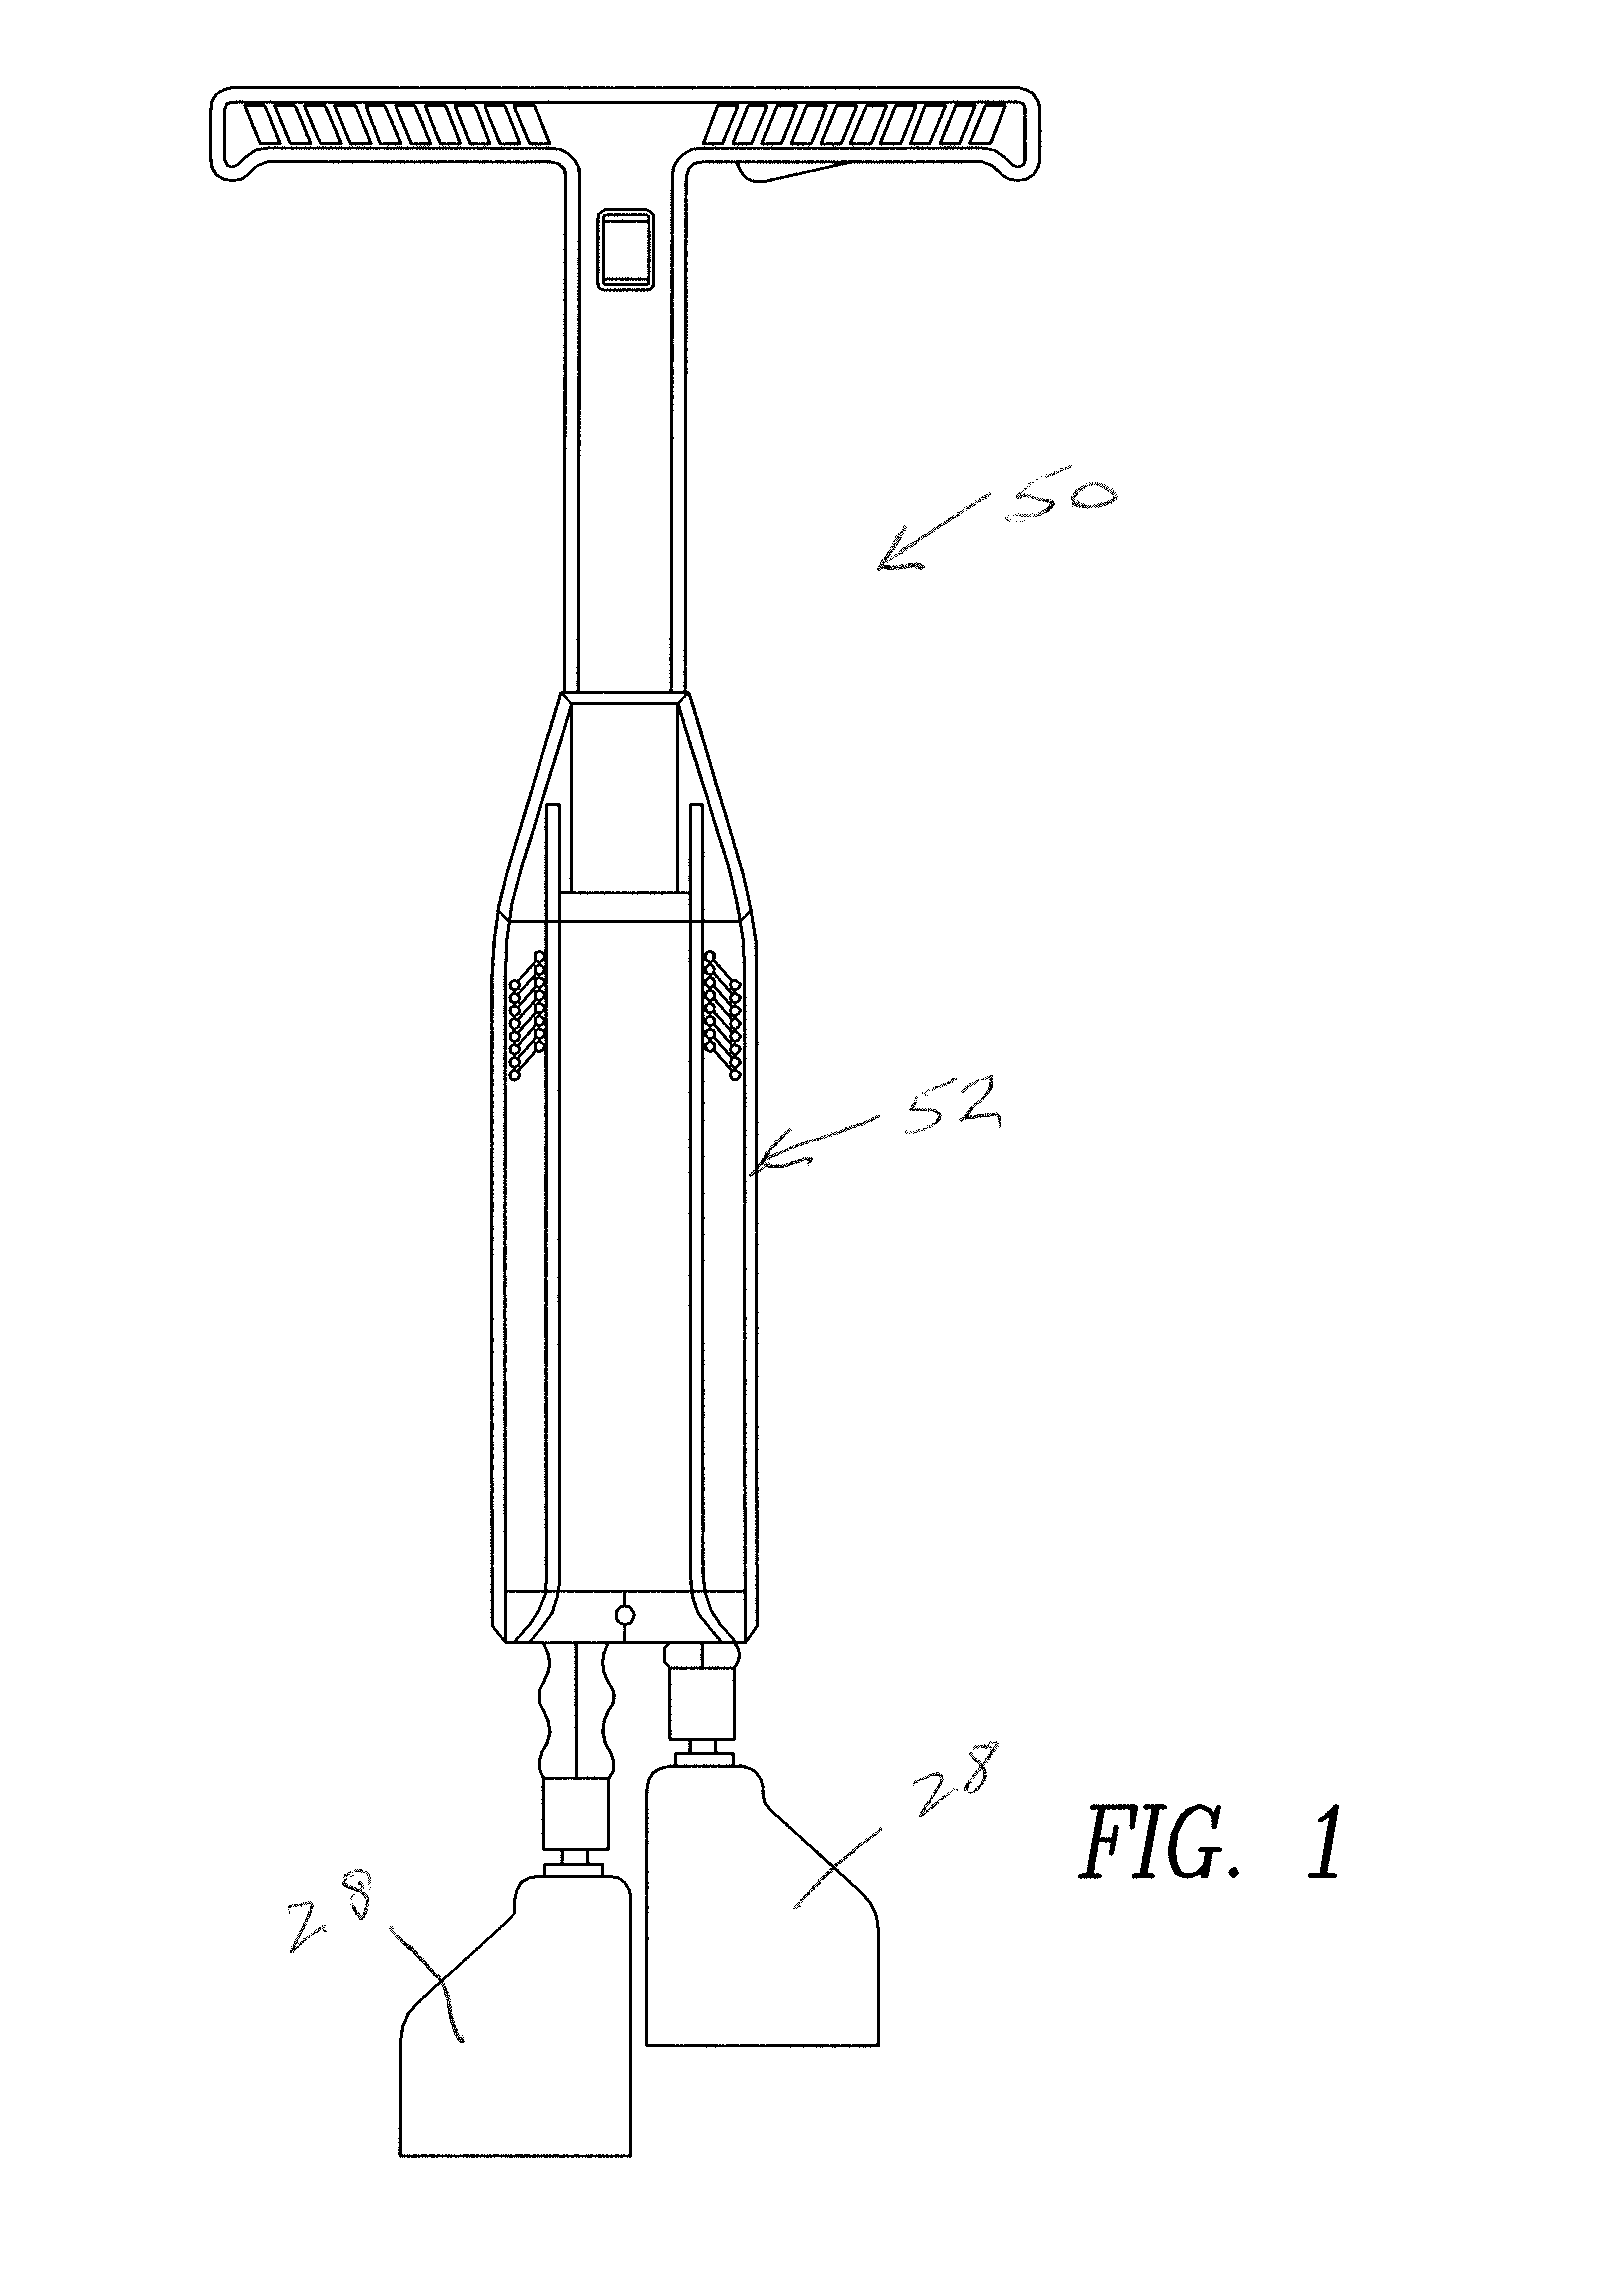 Portable ice breaking tool with two reciprocating blades